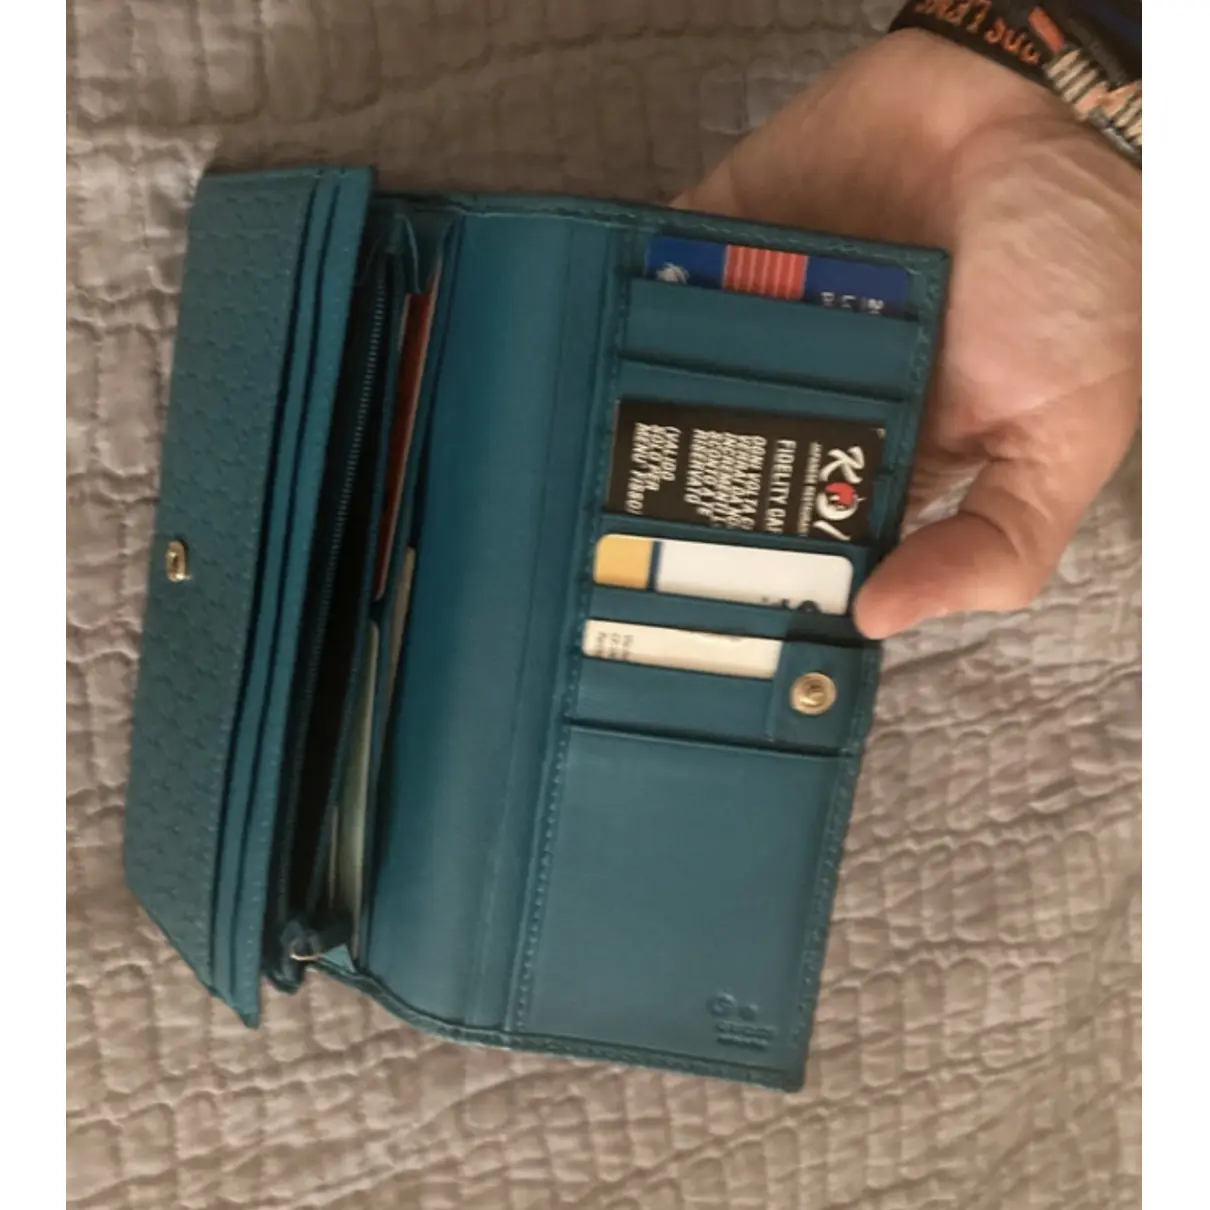 Continental leather wallet Gucci